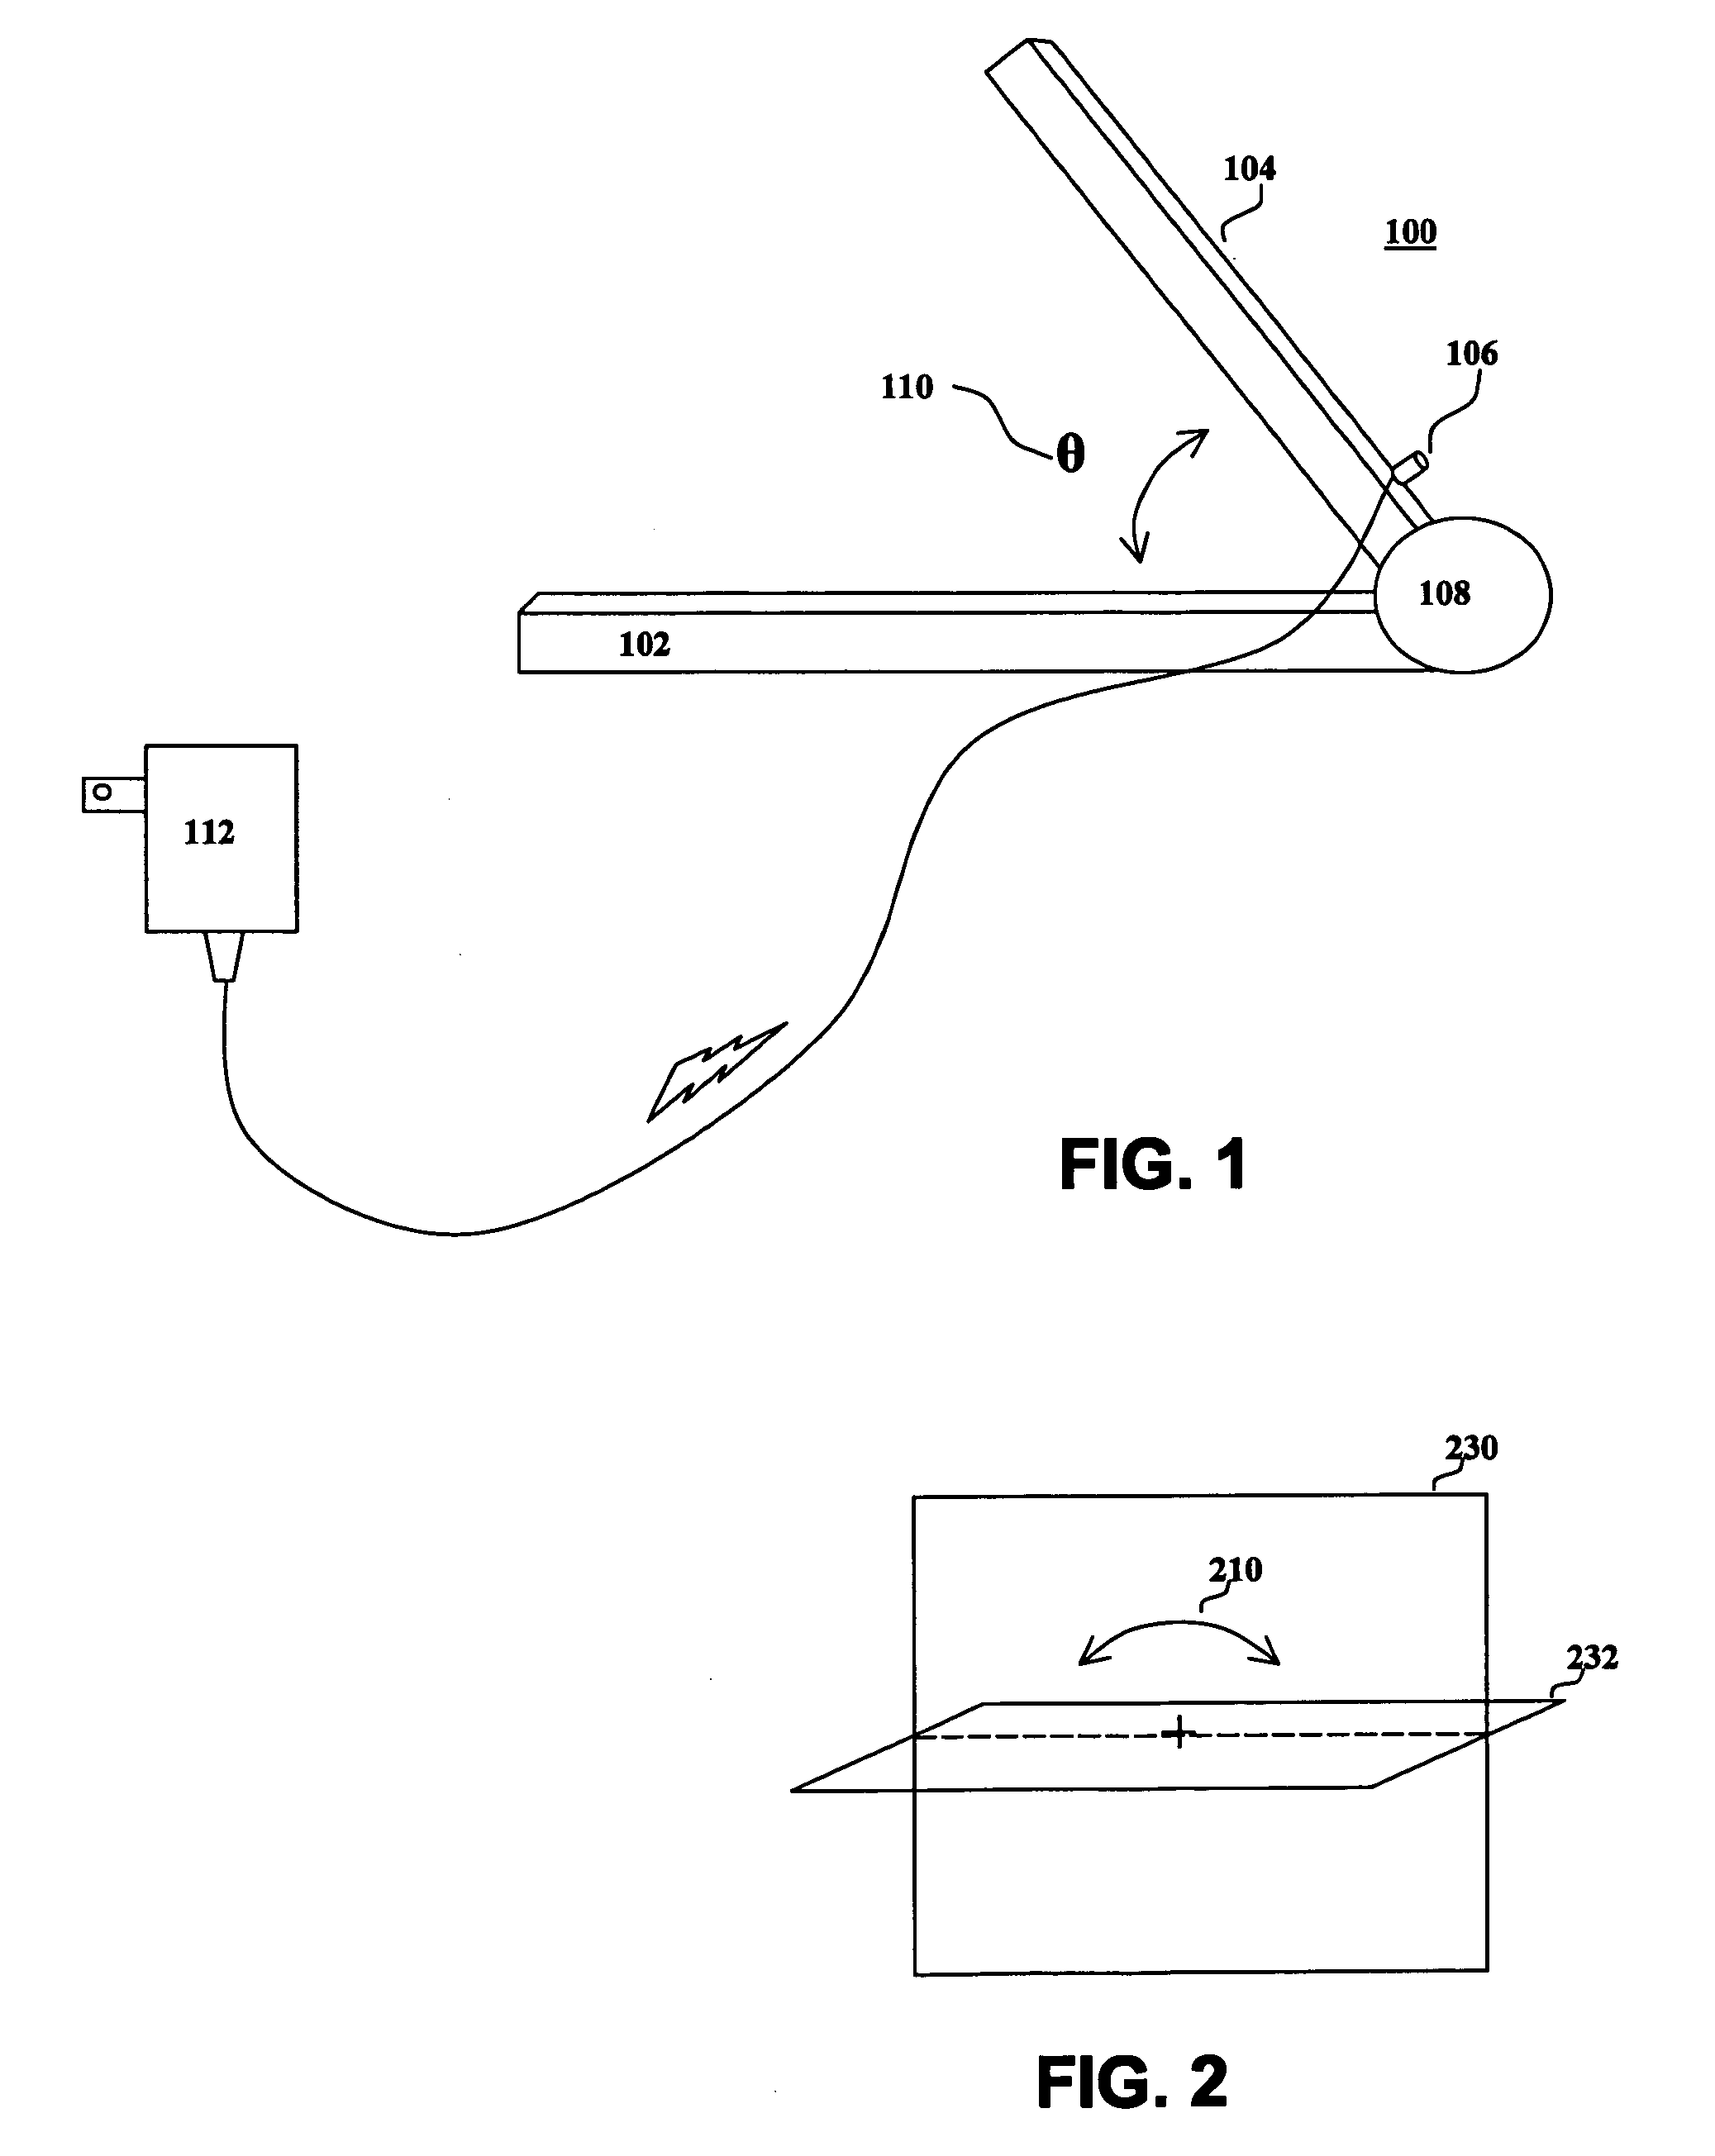 Desktop charger for a portable electronic device with a display